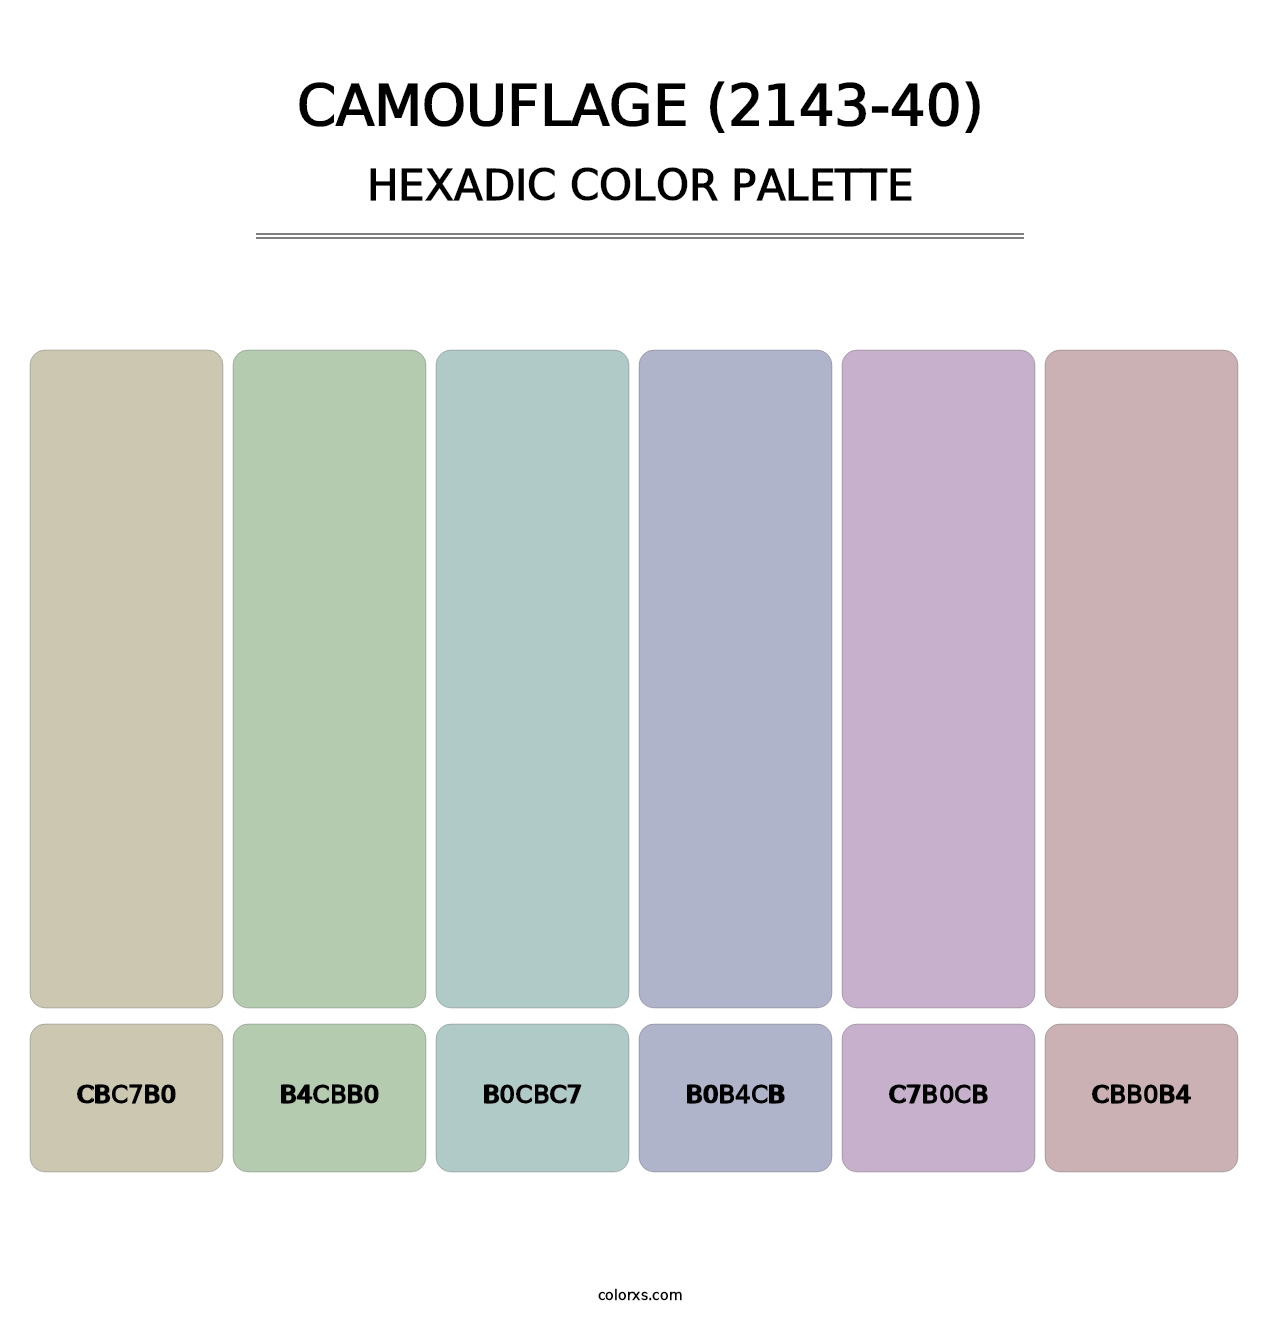 Camouflage (2143-40) - Hexadic Color Palette